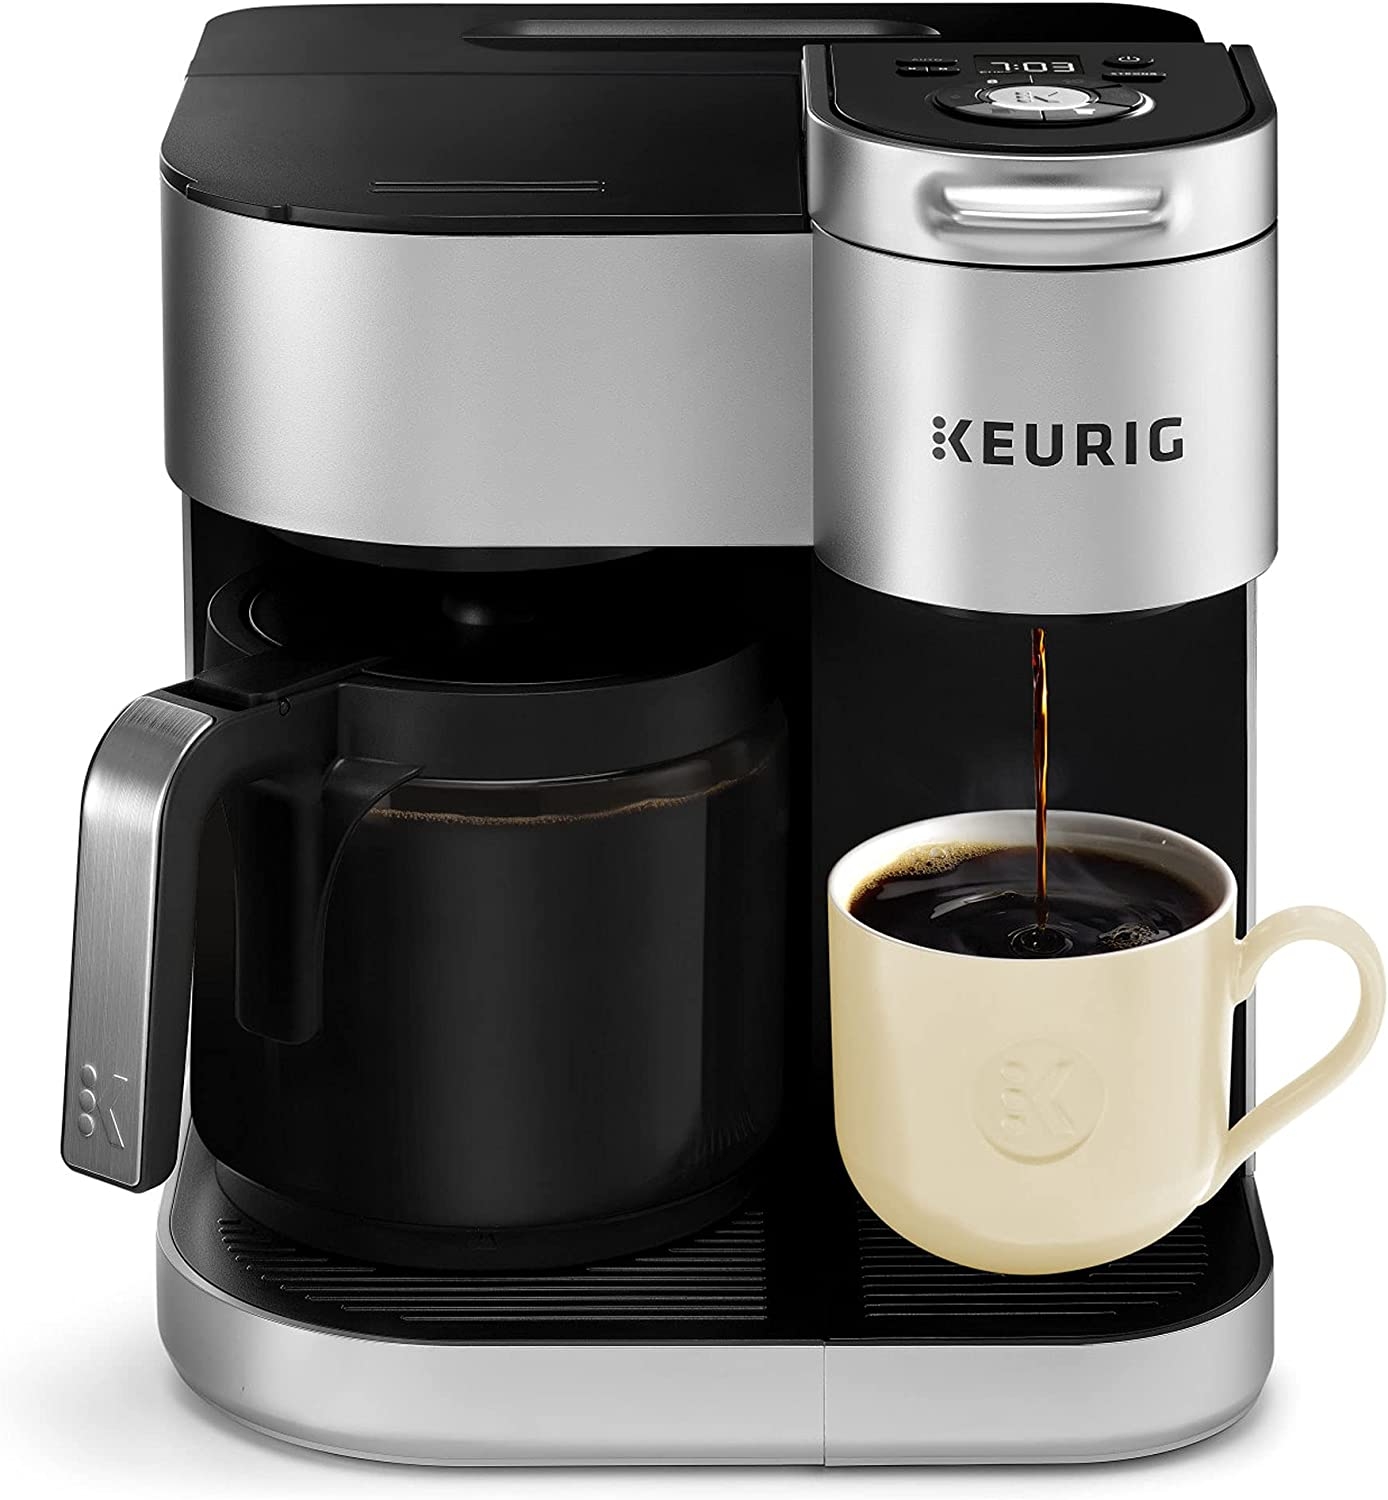 Keurig K-Duo Coffee Maker, Single Serve and 12-Cup Carafe Drip Coffee Brewer, Compatible with K-Cup Pods and Ground Coffee,